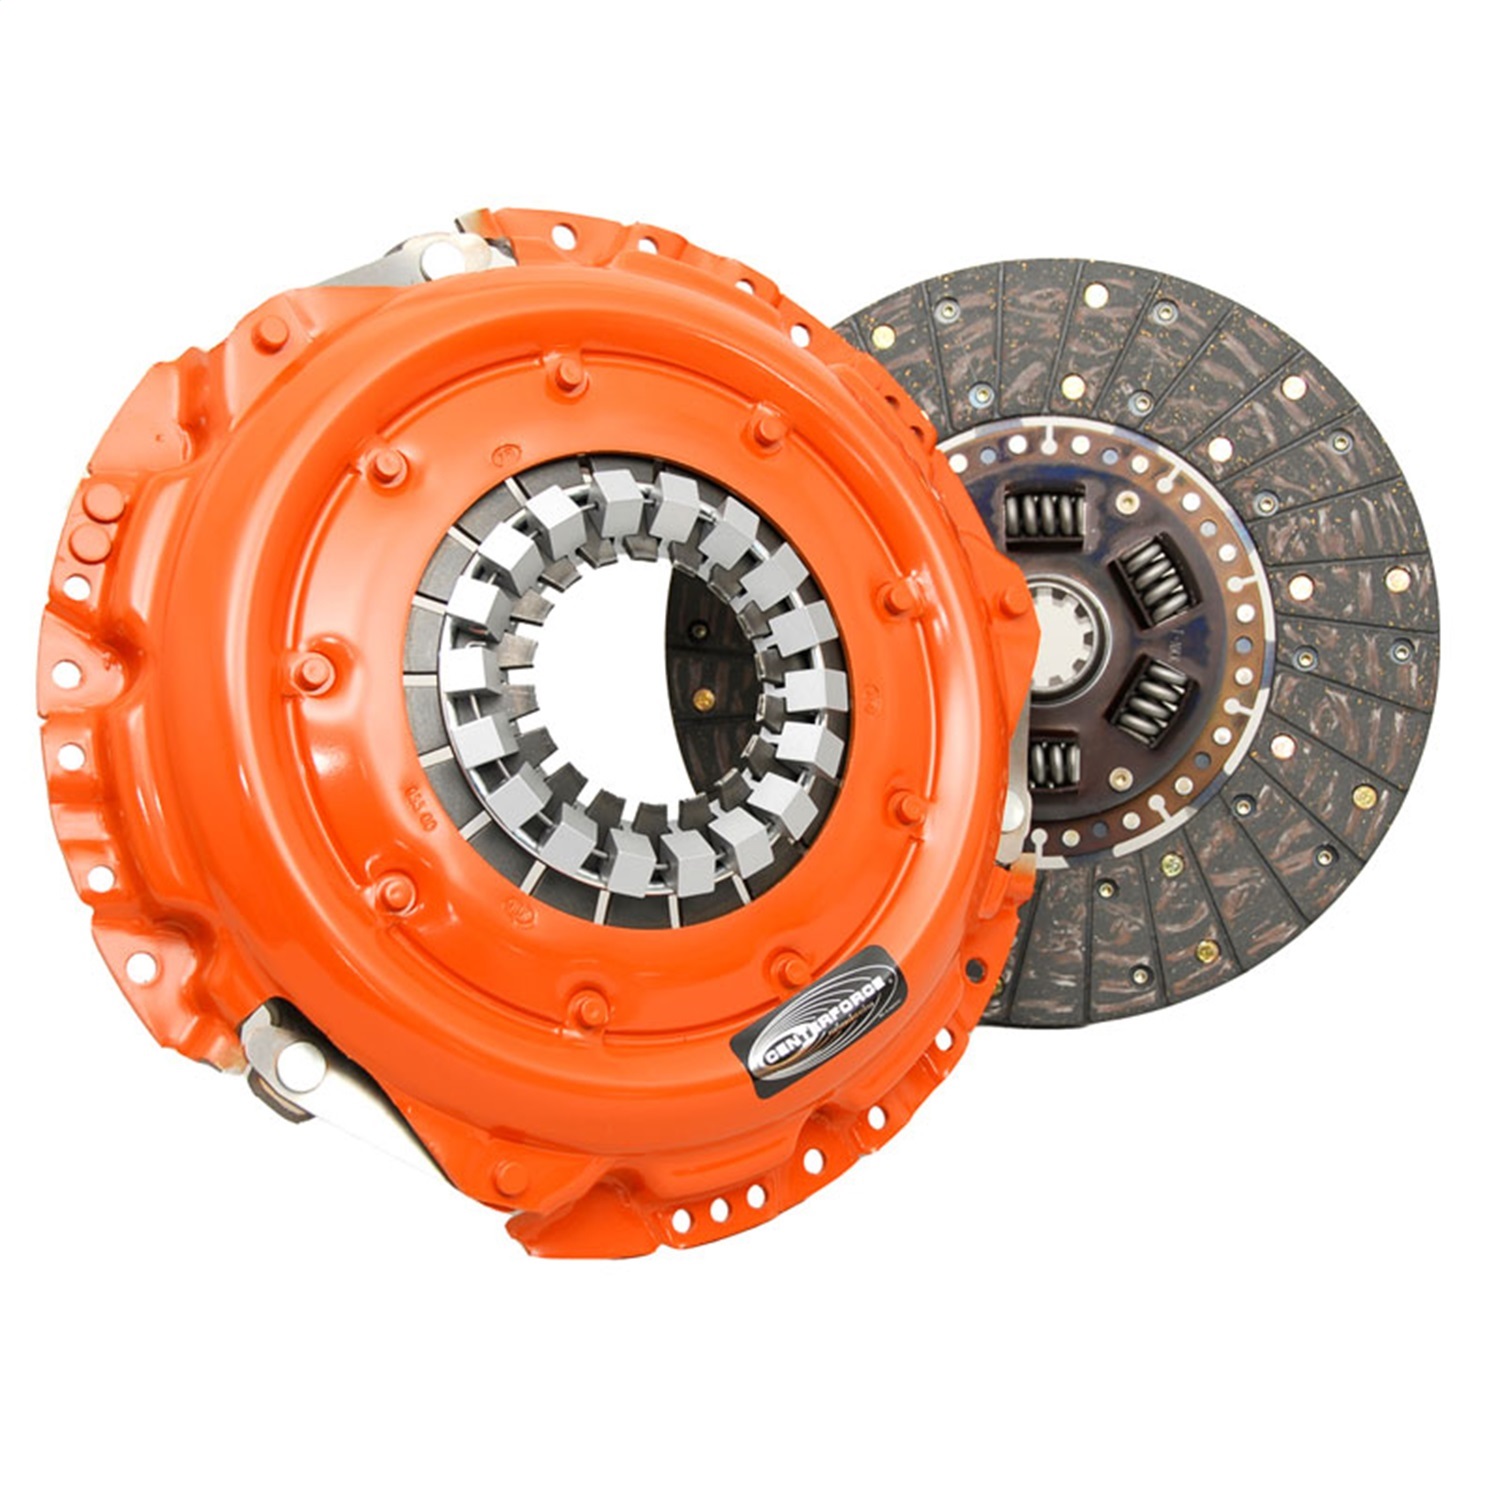 Centerforce Centerforce MST559033 Centerforce II; Clutch Pressure Plate And Disc Set